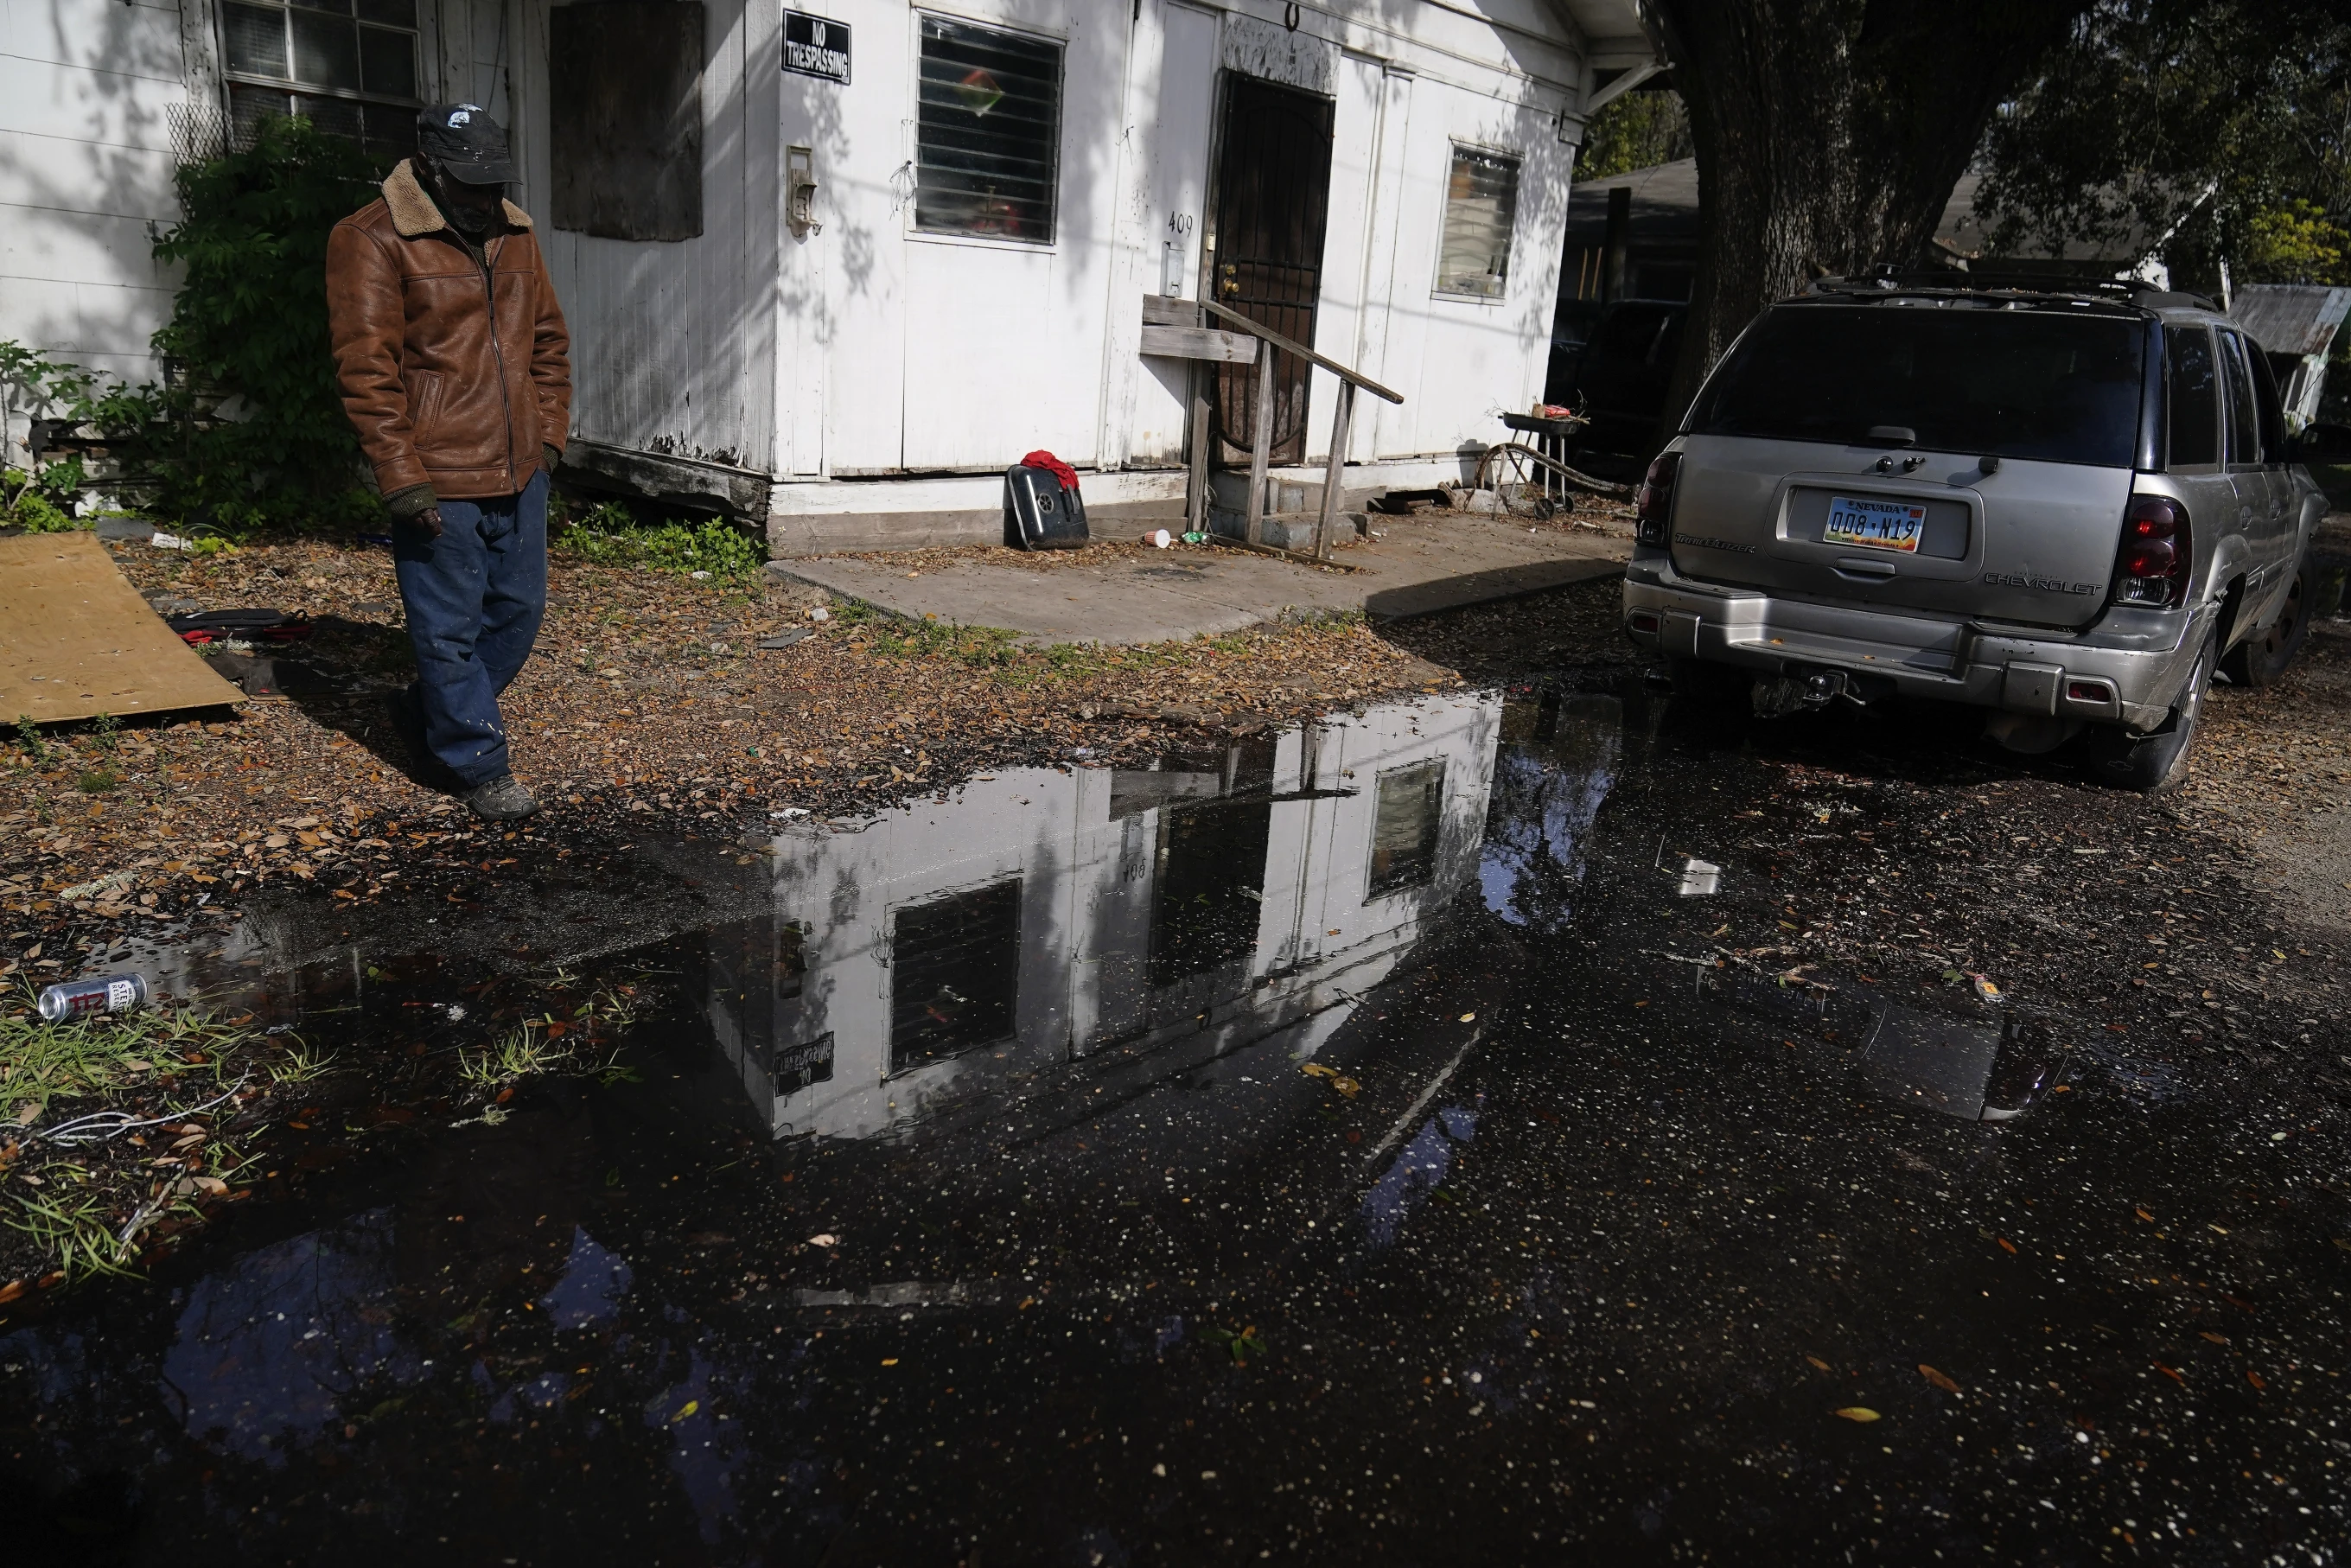 A man stands near his home looking at a street he says has been flooded for months, on Thursday, 7 December 2023, in Prichard, Alabama. Water bubbles up in streets, pooling in neighborhoods for weeks or months. Homes burn to the ground if firefighters can’t draw enough water from hydrants. Utility crews struggle to fix broken pipes while water flows through shut-off valves that don’t work. Photo: Brynn Anderson / AP Photo